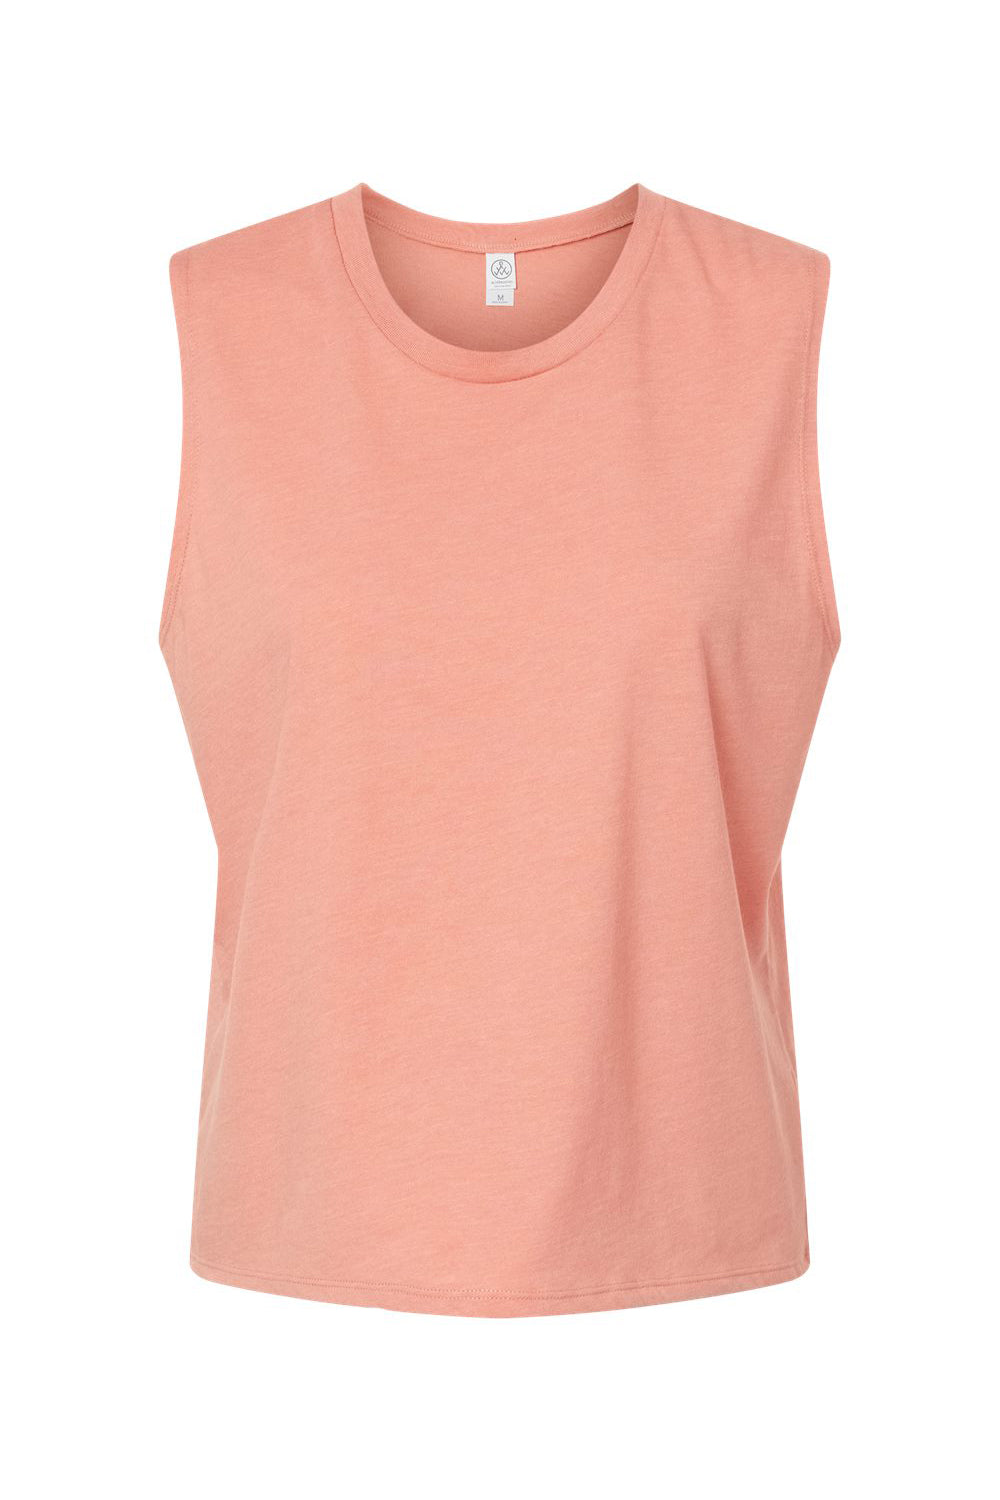 Alternative 1174CV Womens CVC Go To Crop Muscle Tank Top Heather Sunset Coral Flat Front